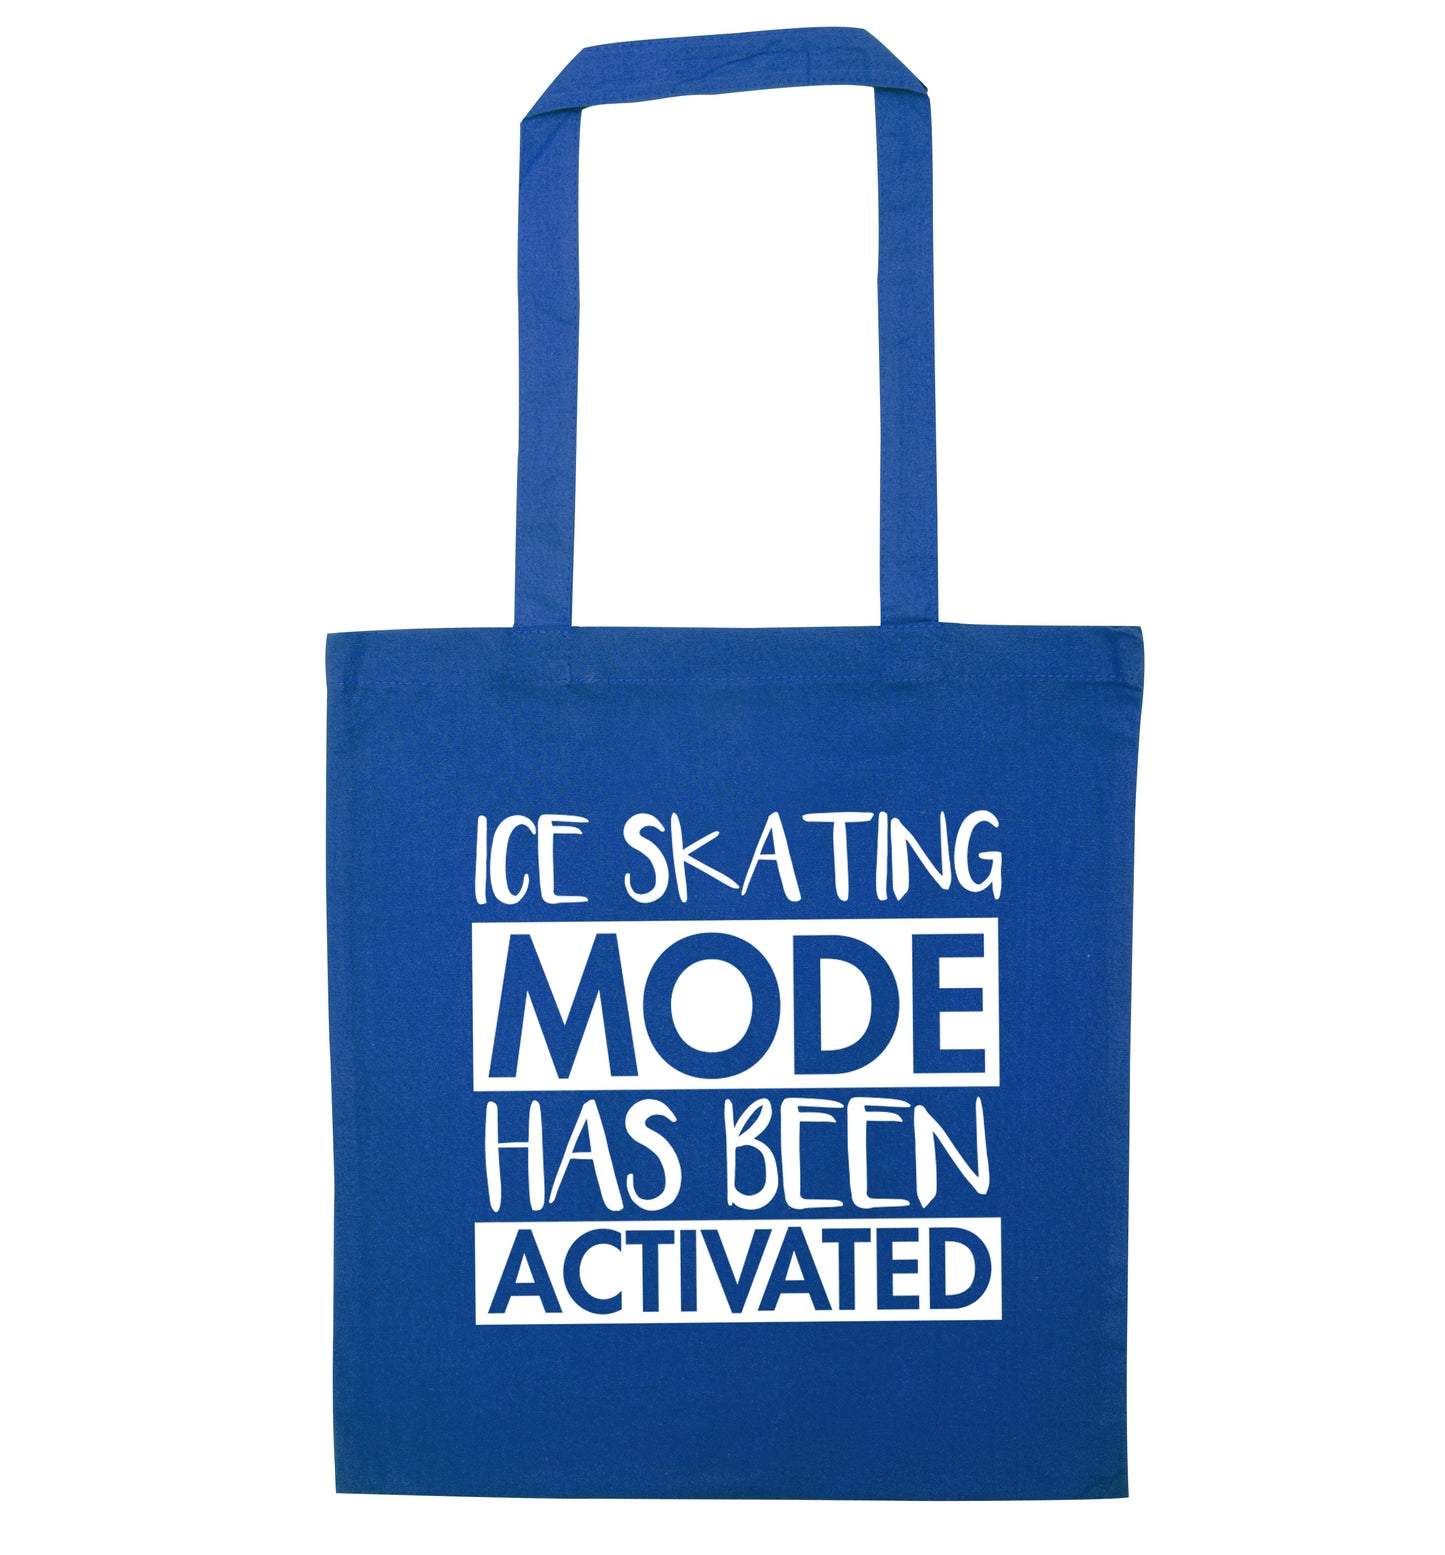 Ice skating mode activated blue tote bag